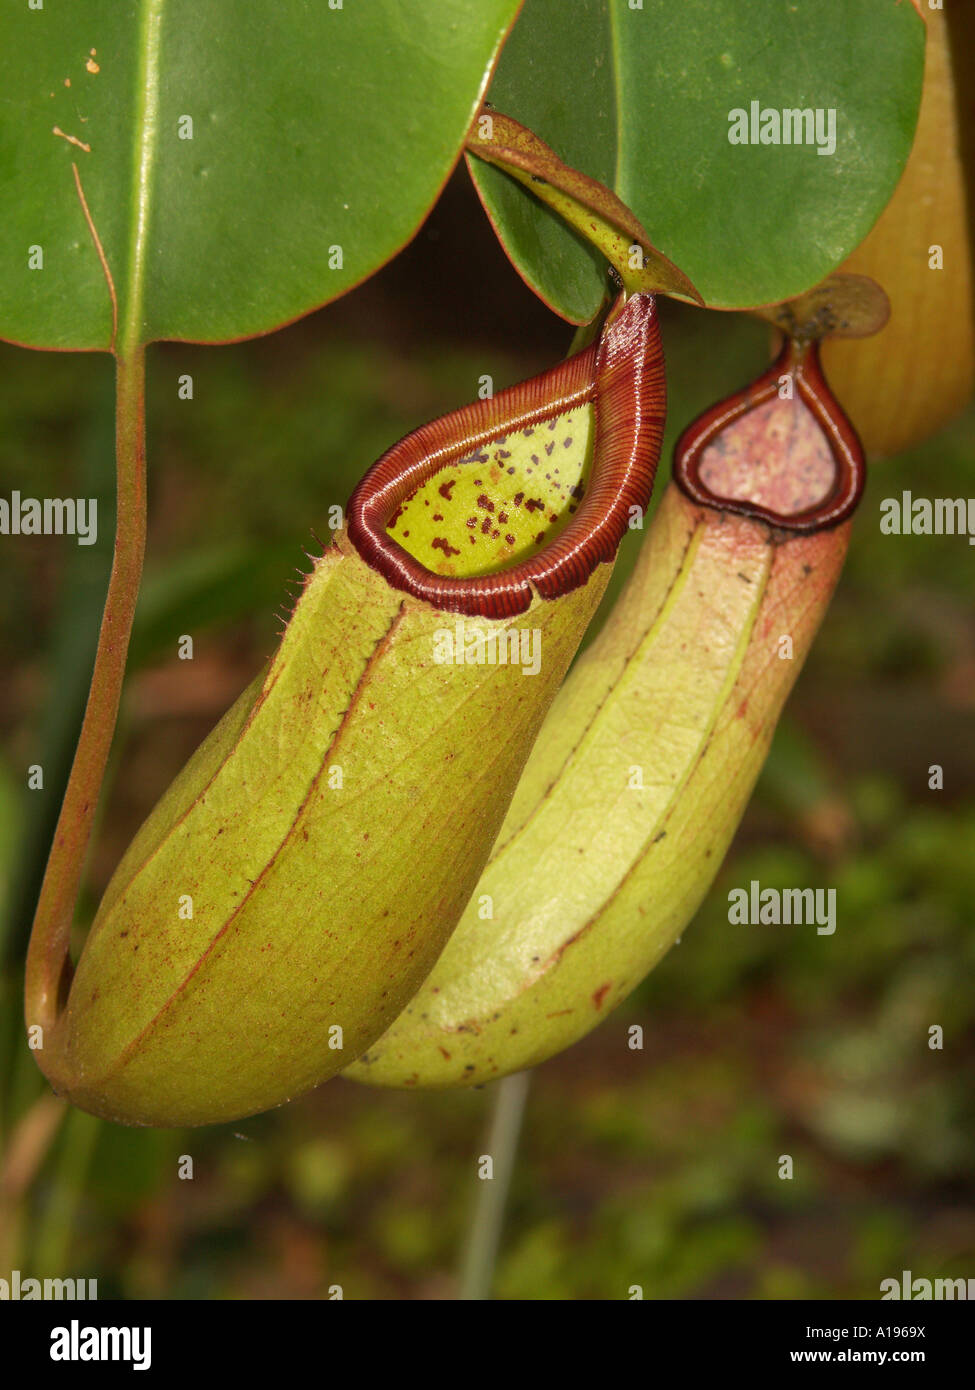 Large pitchers of carnivorous plant - Nepenthes species - hanging from a tree and showing opening into which its prey fall Stock Photo